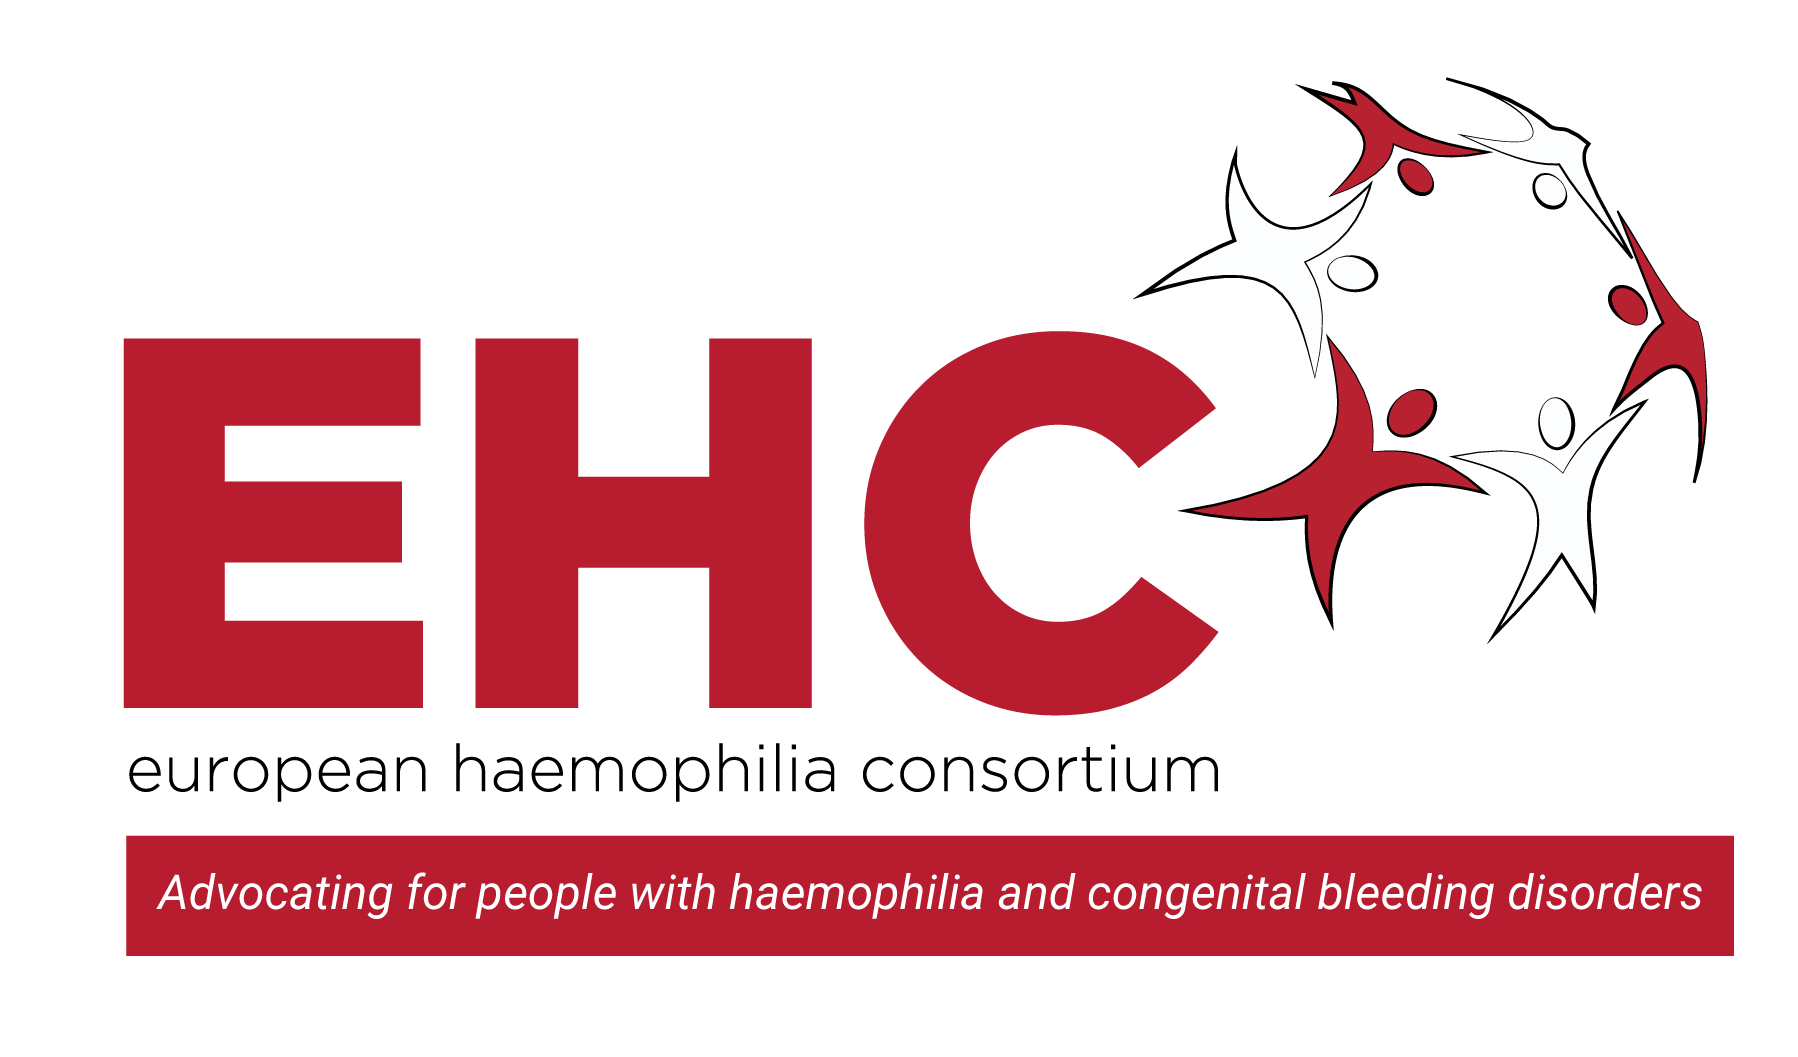 EHC – European Haemophilia Consortium - Advocating for people with haemophilia and congenital bleeding disorders - /council-of-the-european-union/